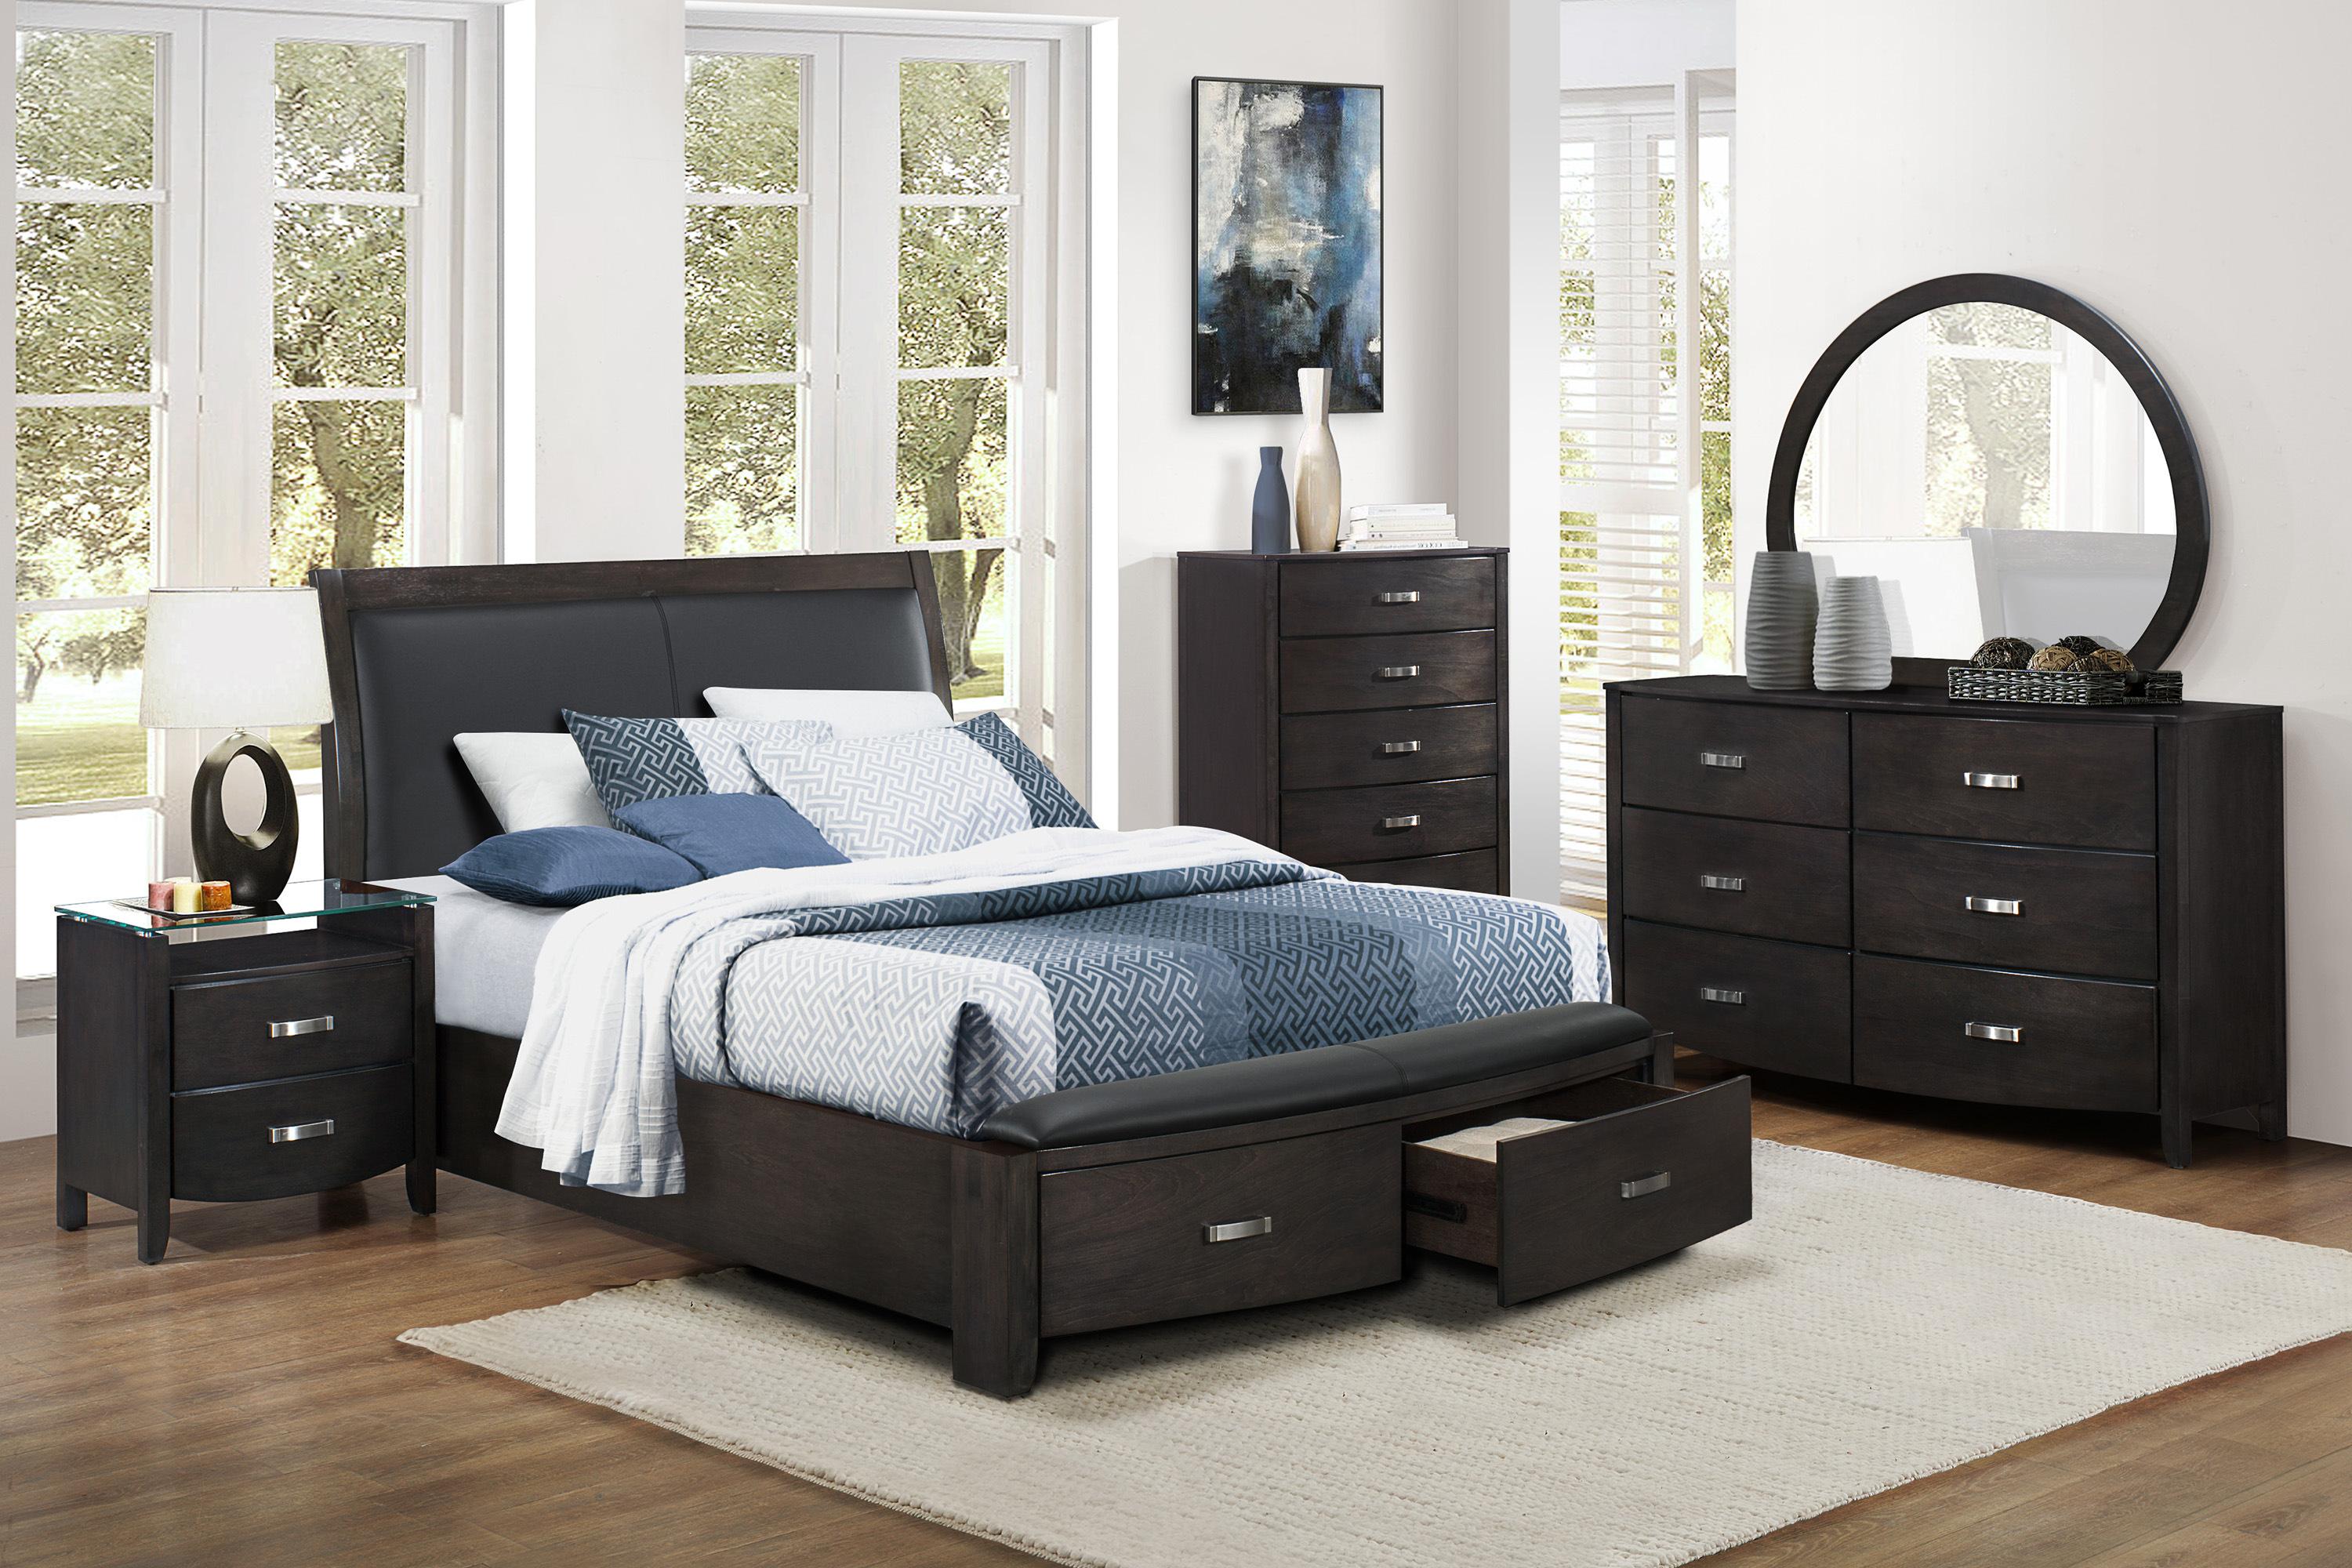 Contemporary Bedroom Set 1737KNGY-1CK-5PC Lyric 1737KNGY-1CK-5PC in Gray Faux Leather